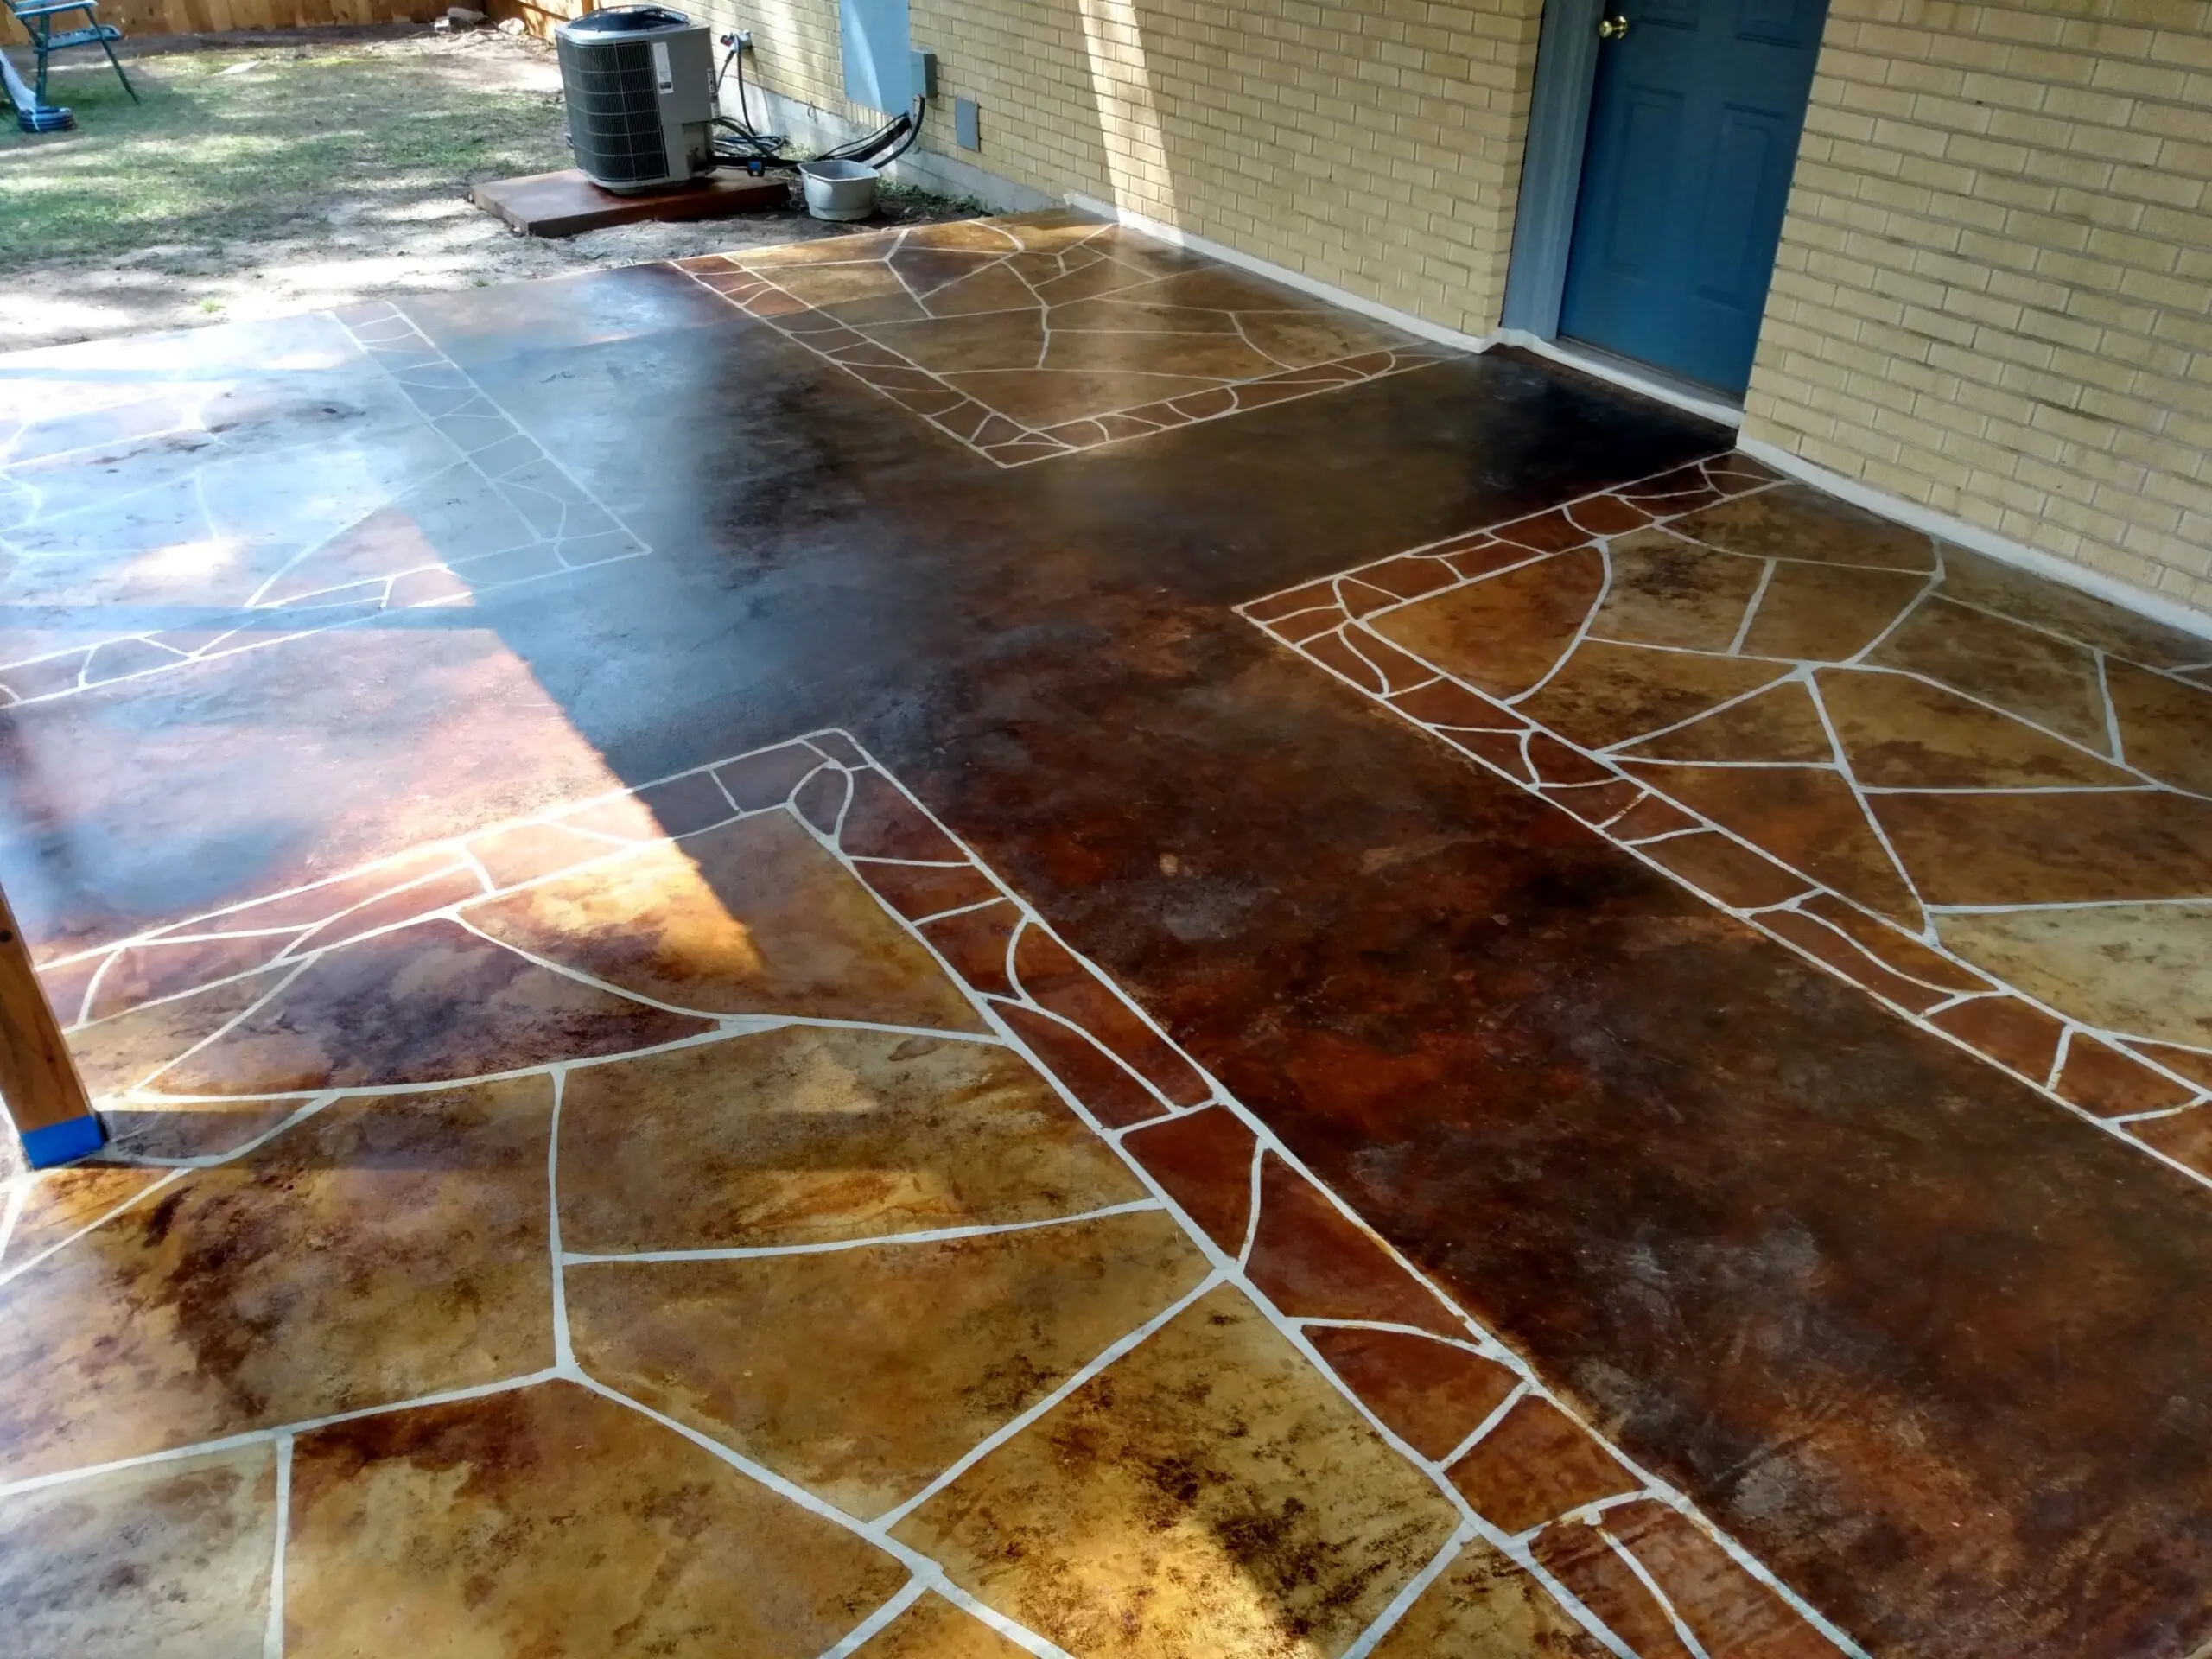 Image displaying the completed faux flagstone porch, with vibrant colors and unique design, fully transformed after the staining process